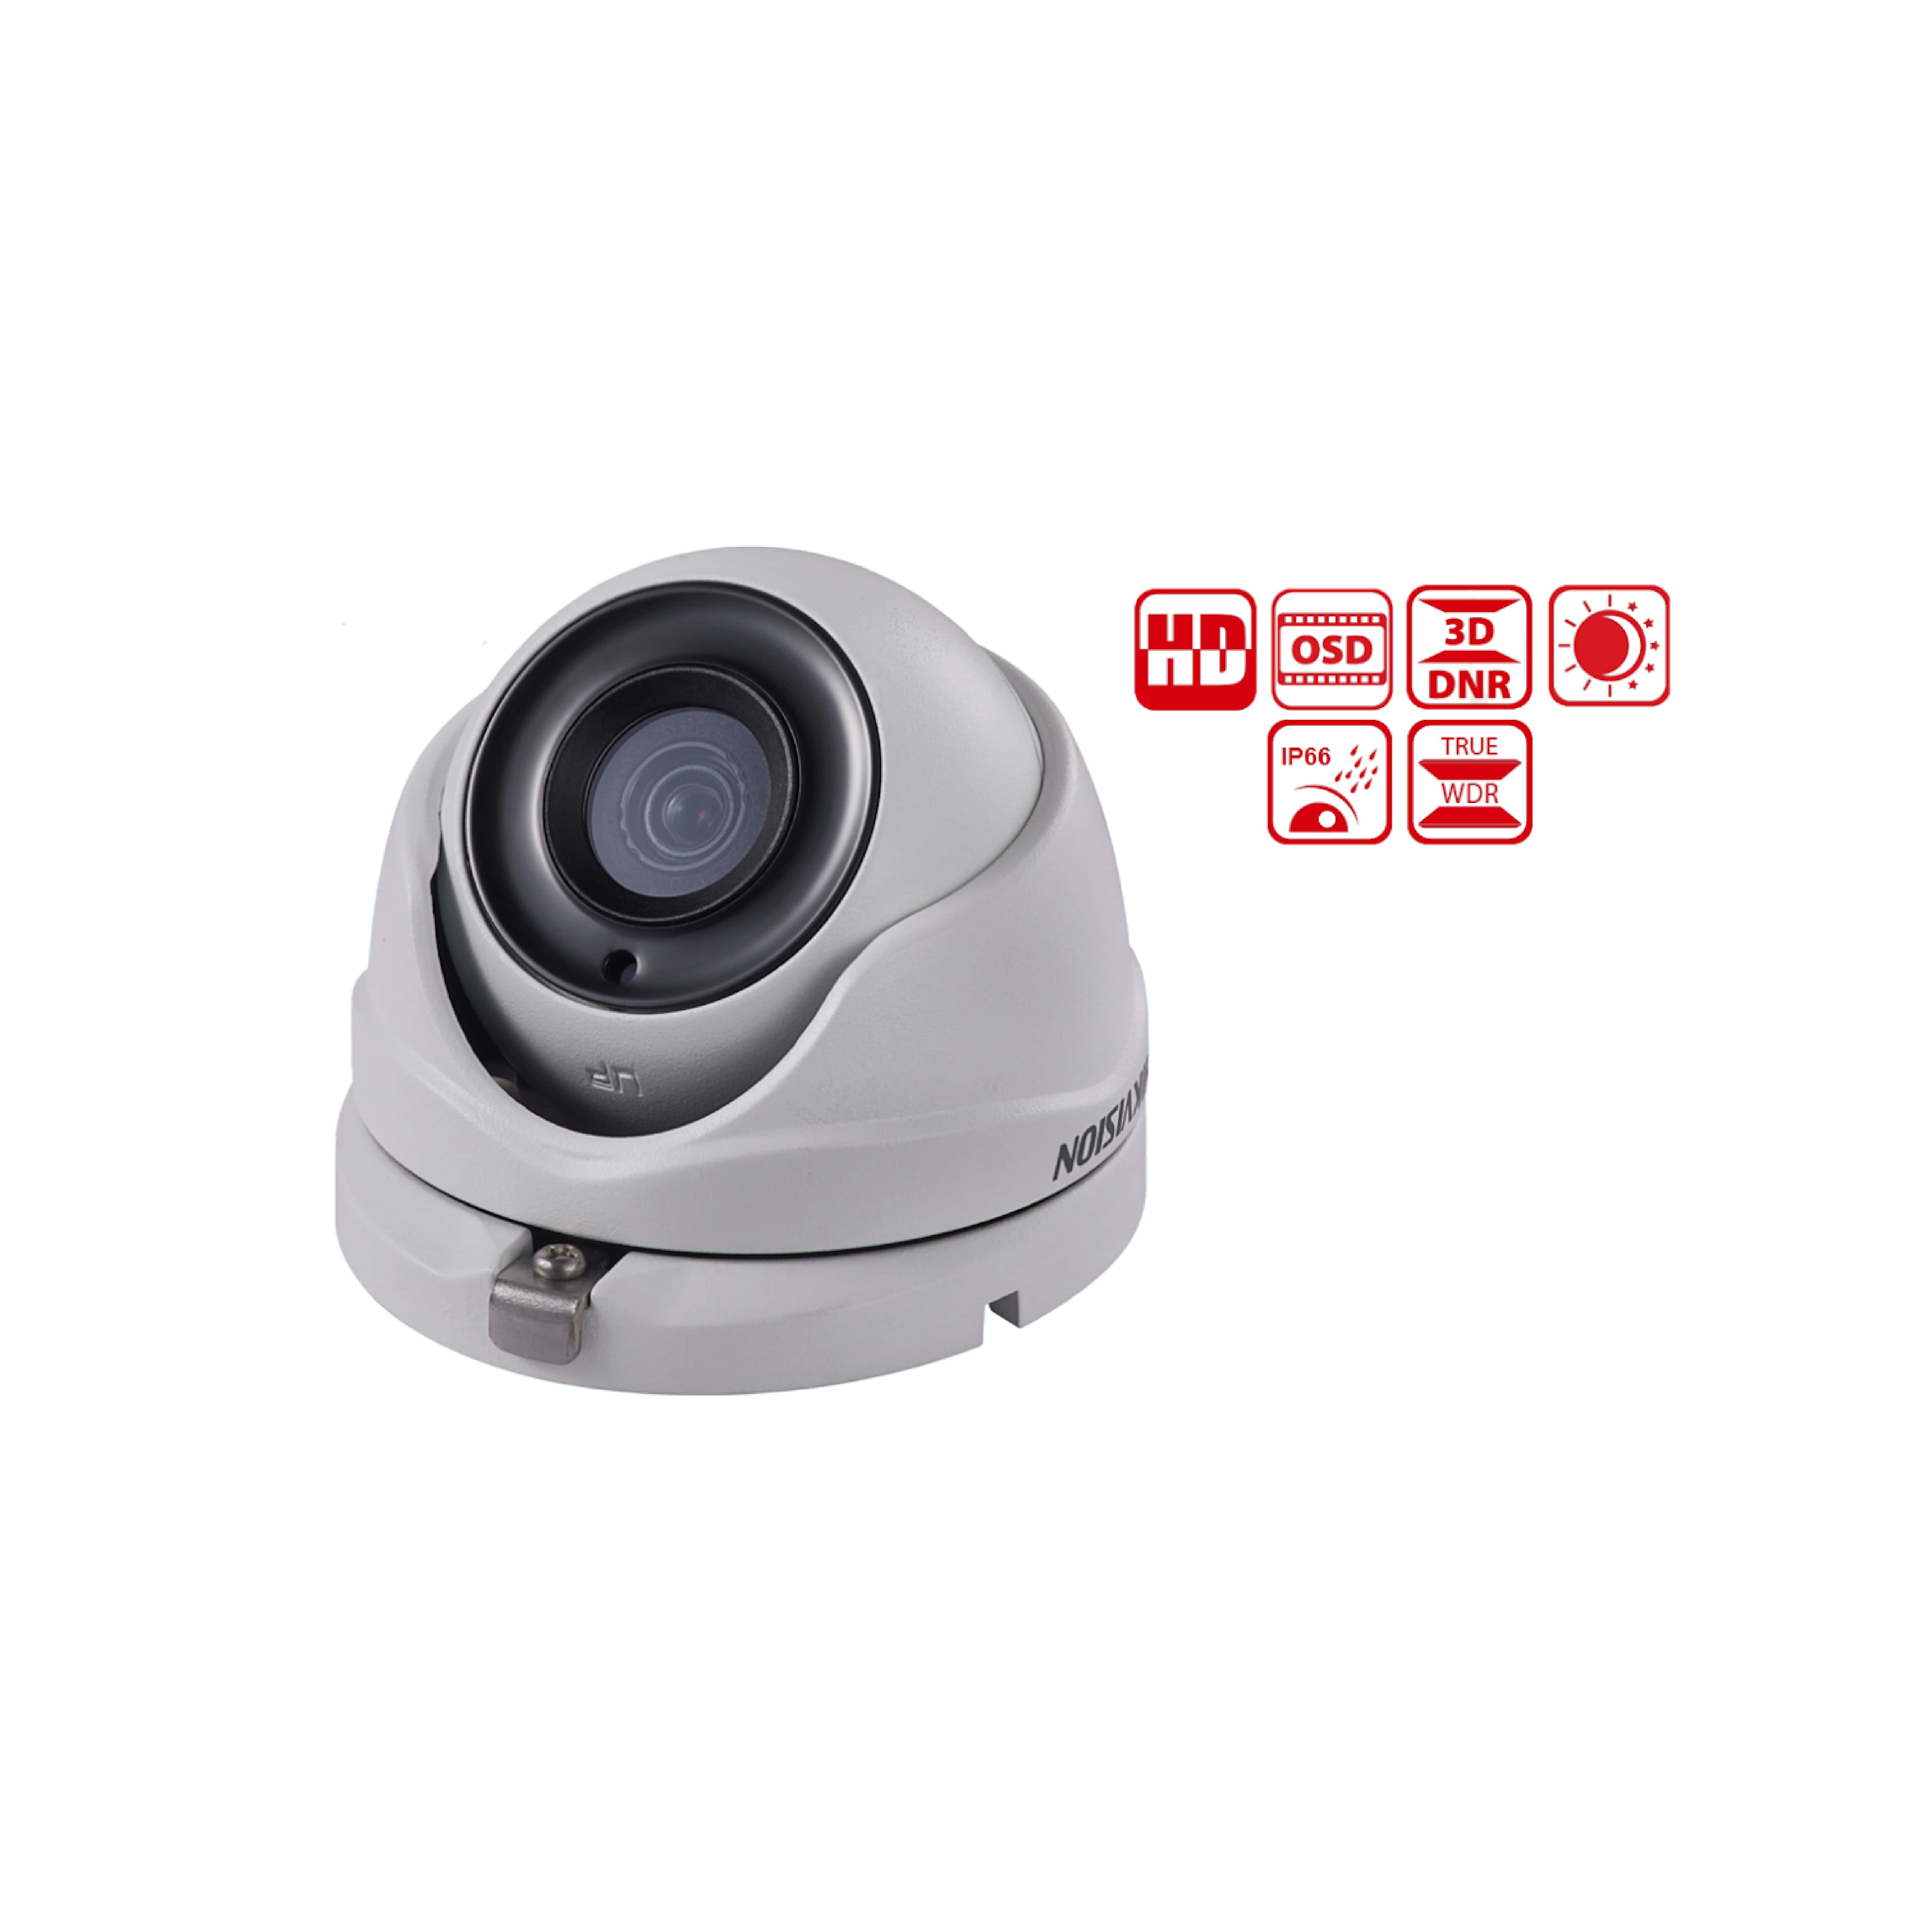 Mắt Camera đồng trục Hikvision DS-2CE56F1T-ITM 2.0 Mpx lắp trong nhà